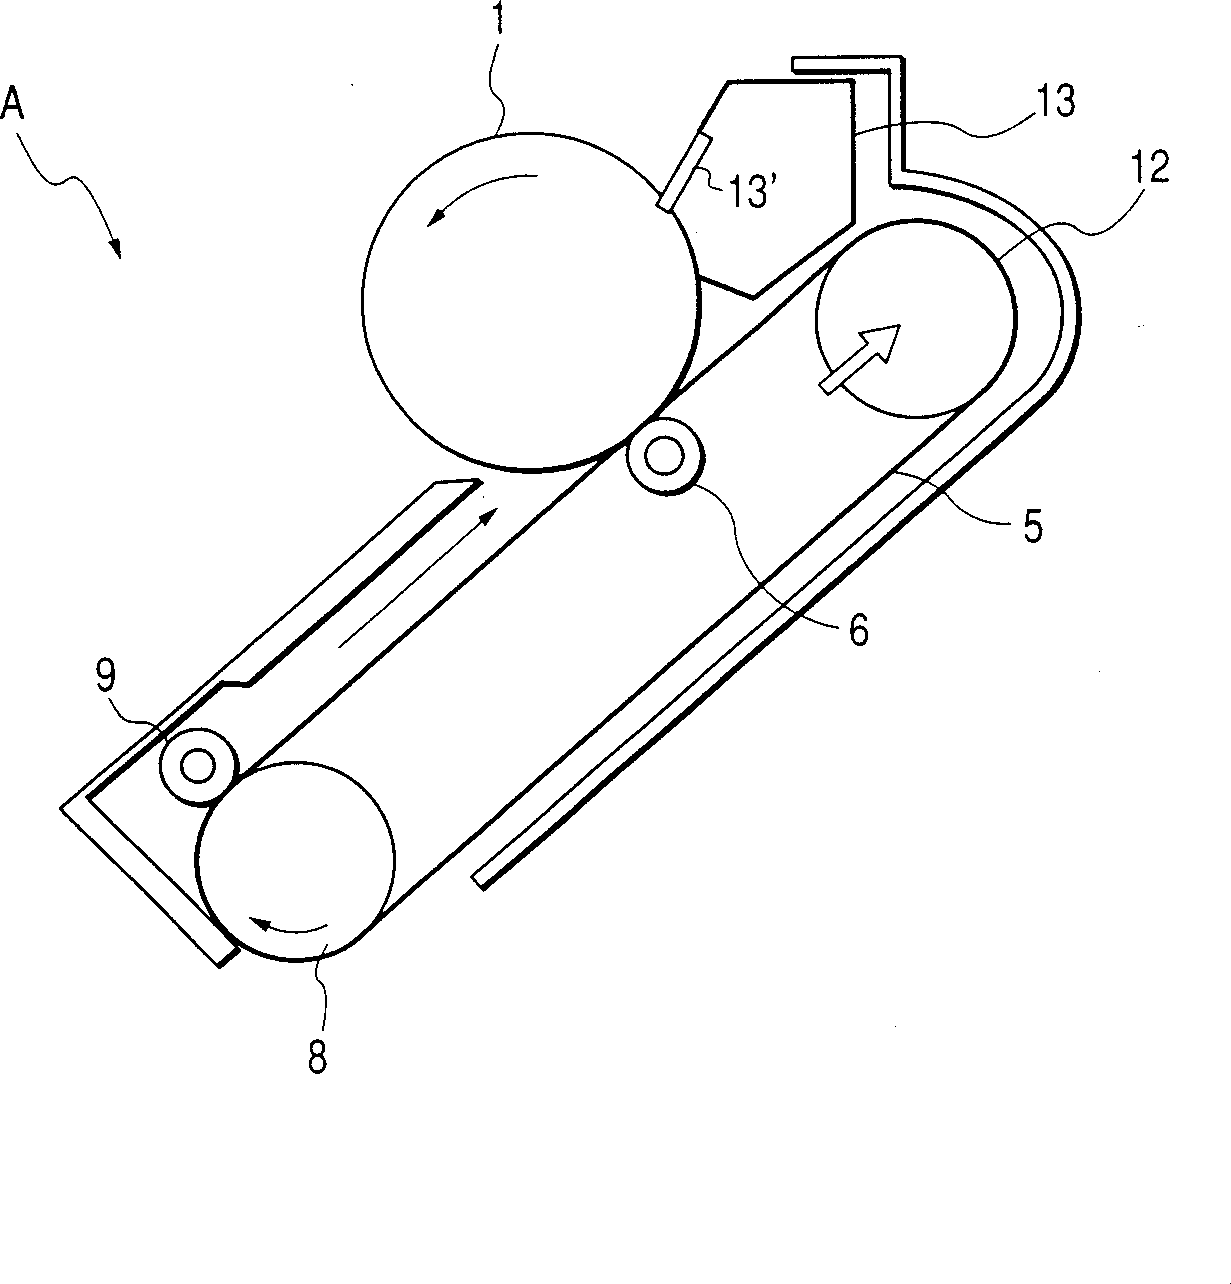 Processing box image device and inter-transferring belt